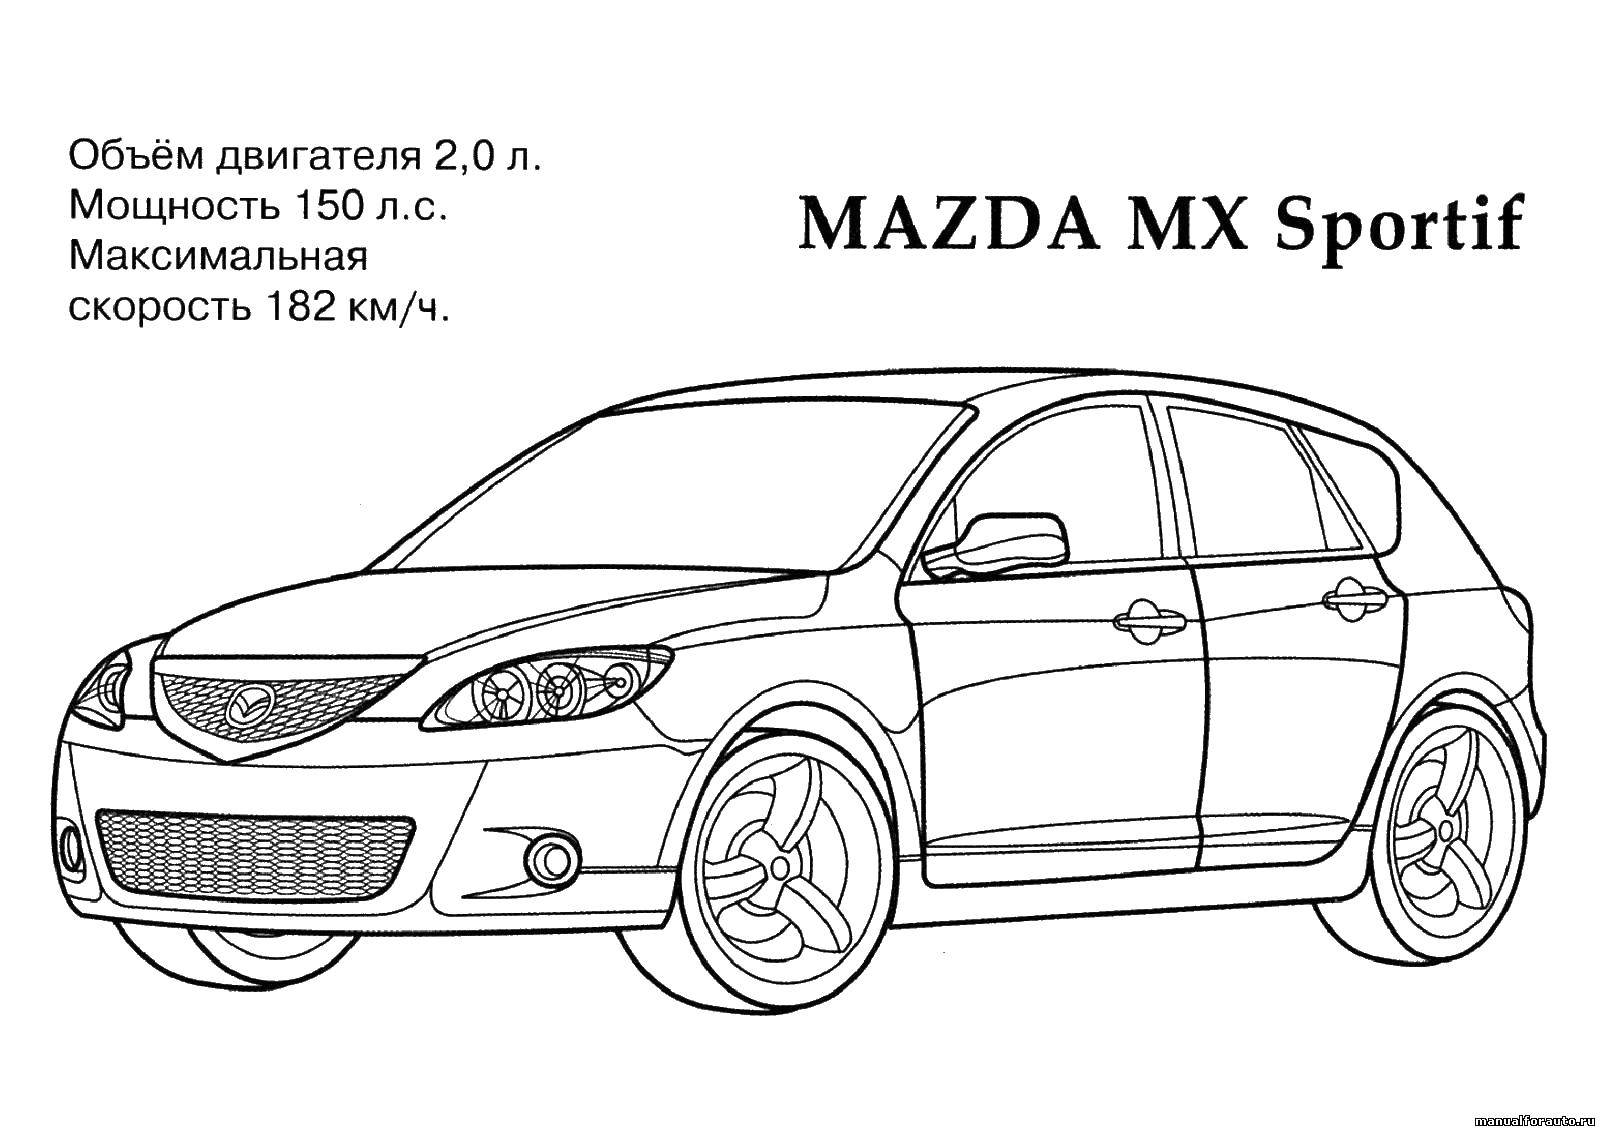 Coloring Mazda MX sportit. Category coloring. Tags:  Transport, car.